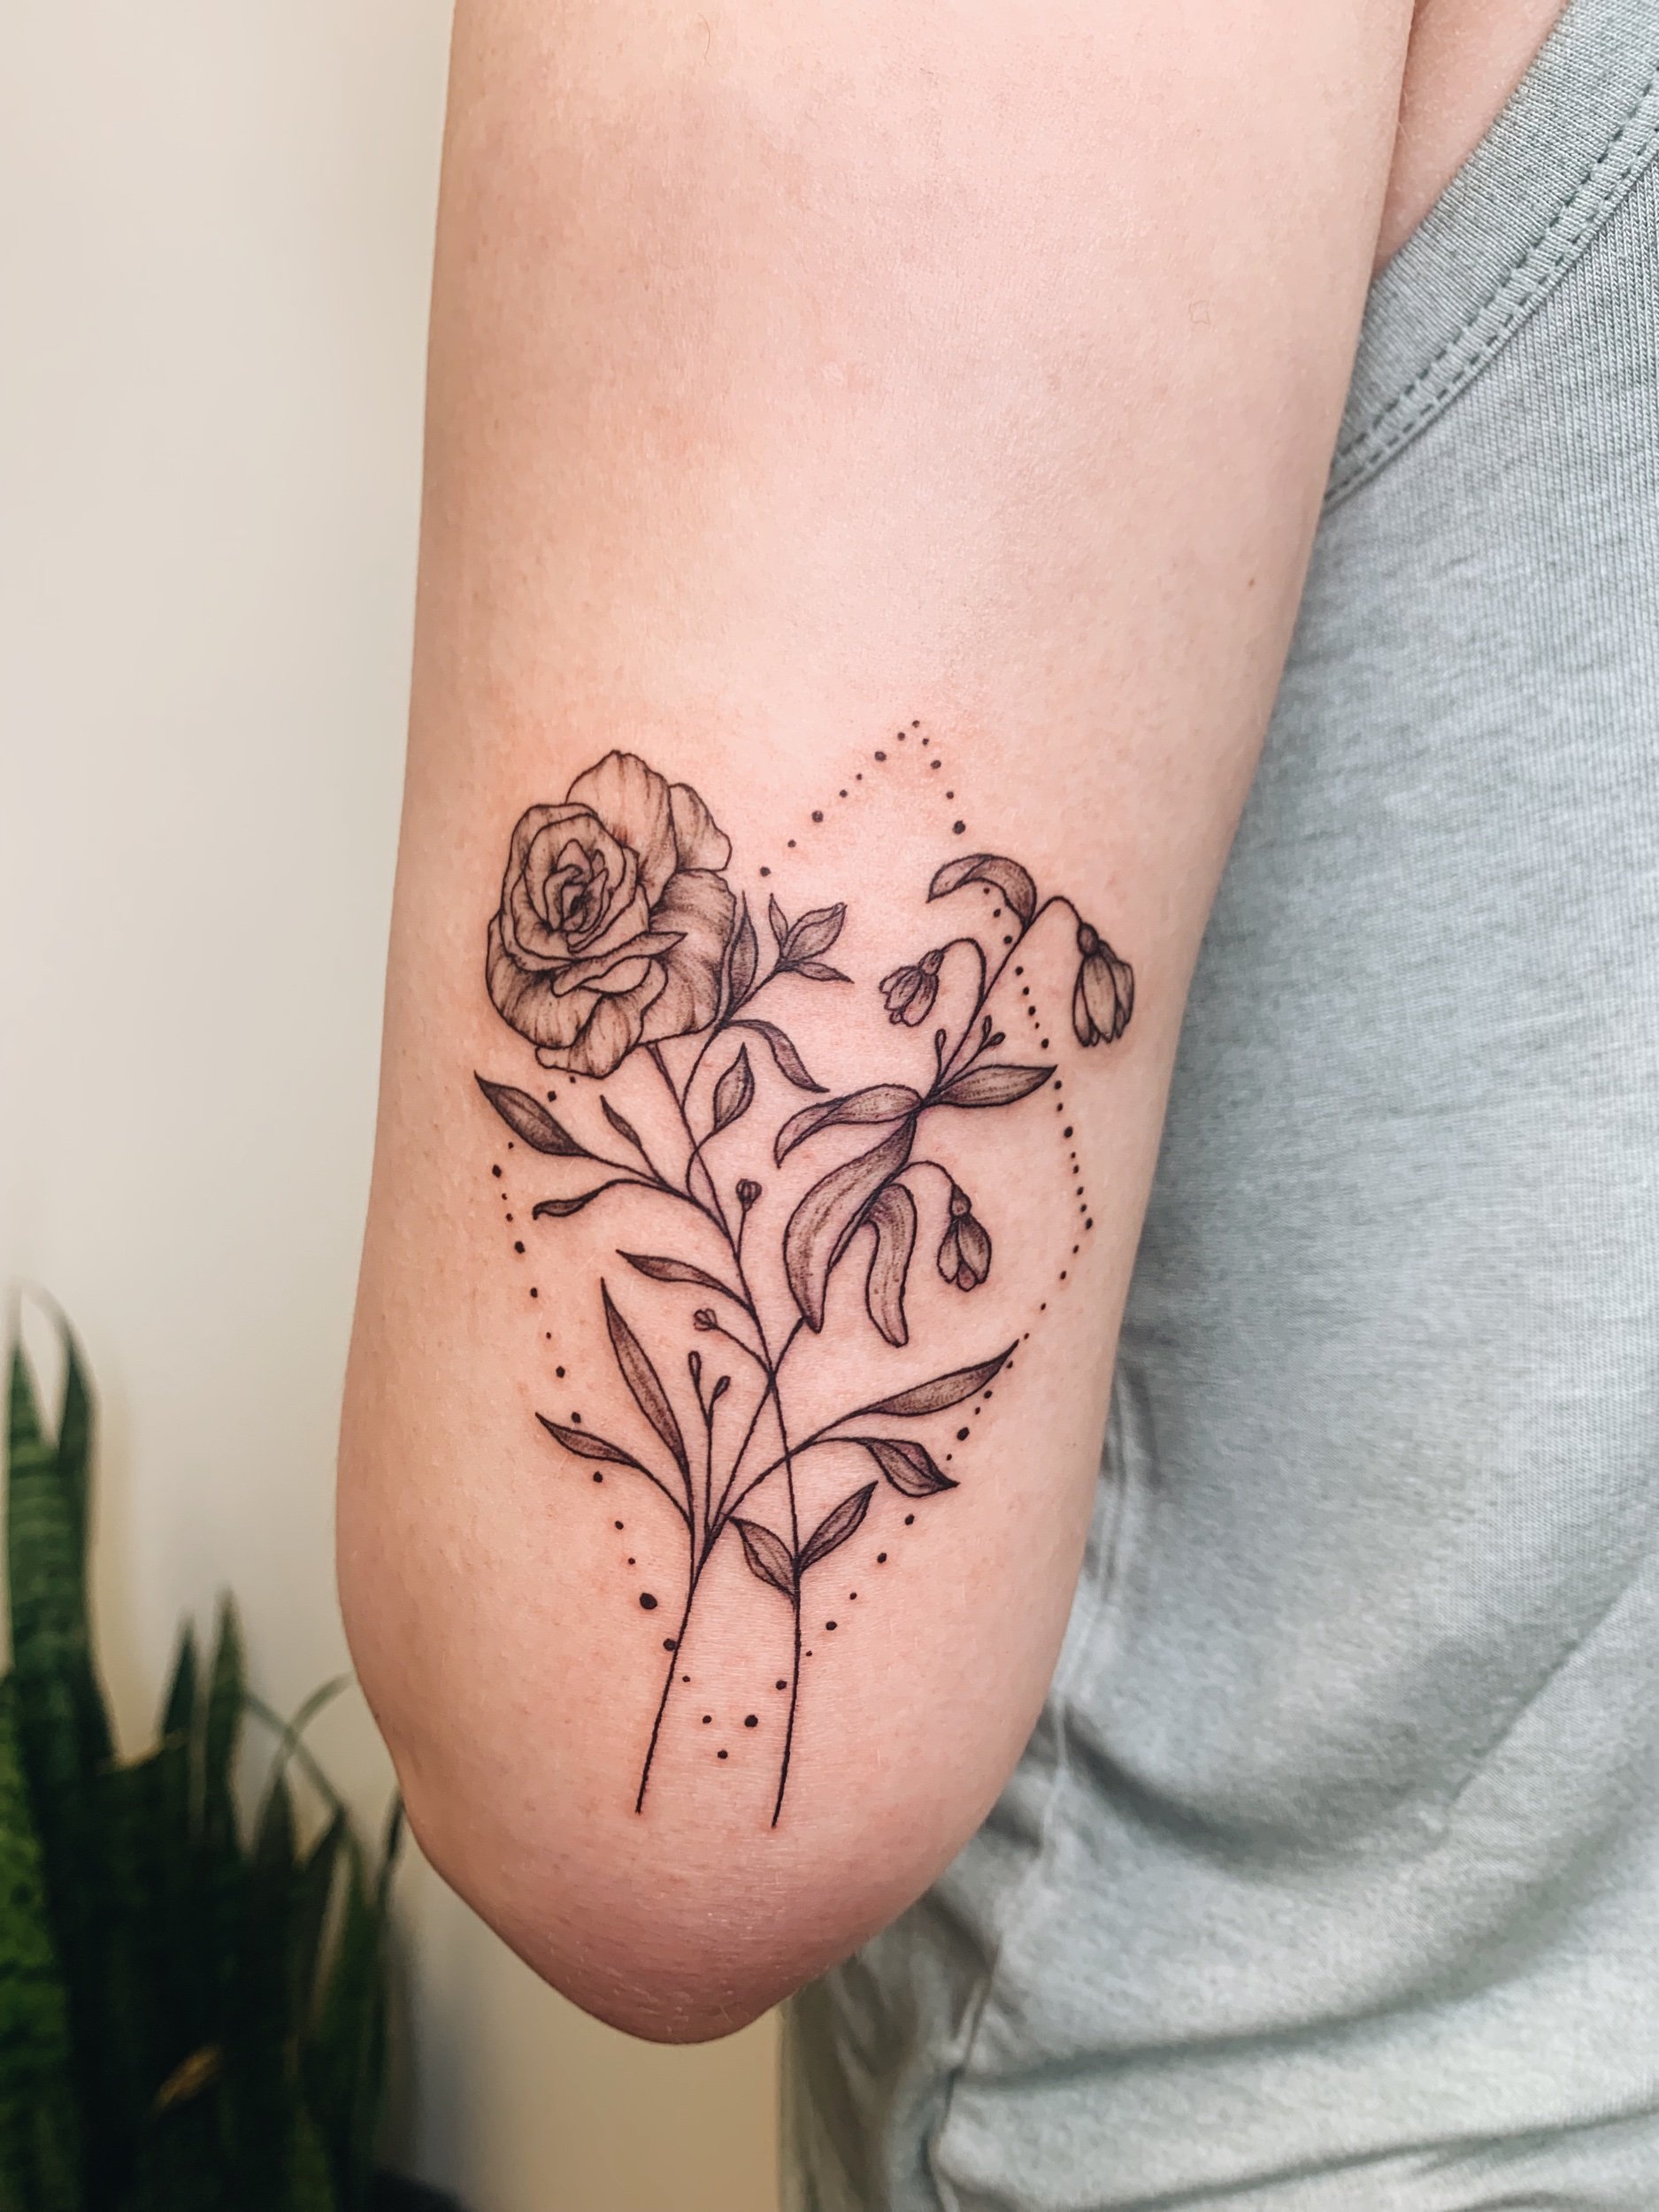 Kalawa Tattooer on Twitter Botanical moon with daffodil and leaf Thank  you so much Lola Check my studio karbonestudio kalawatattooer  moontattoo fineline  tattoo moontattoo botanical flowertattoo  moonflower inspiration finework 